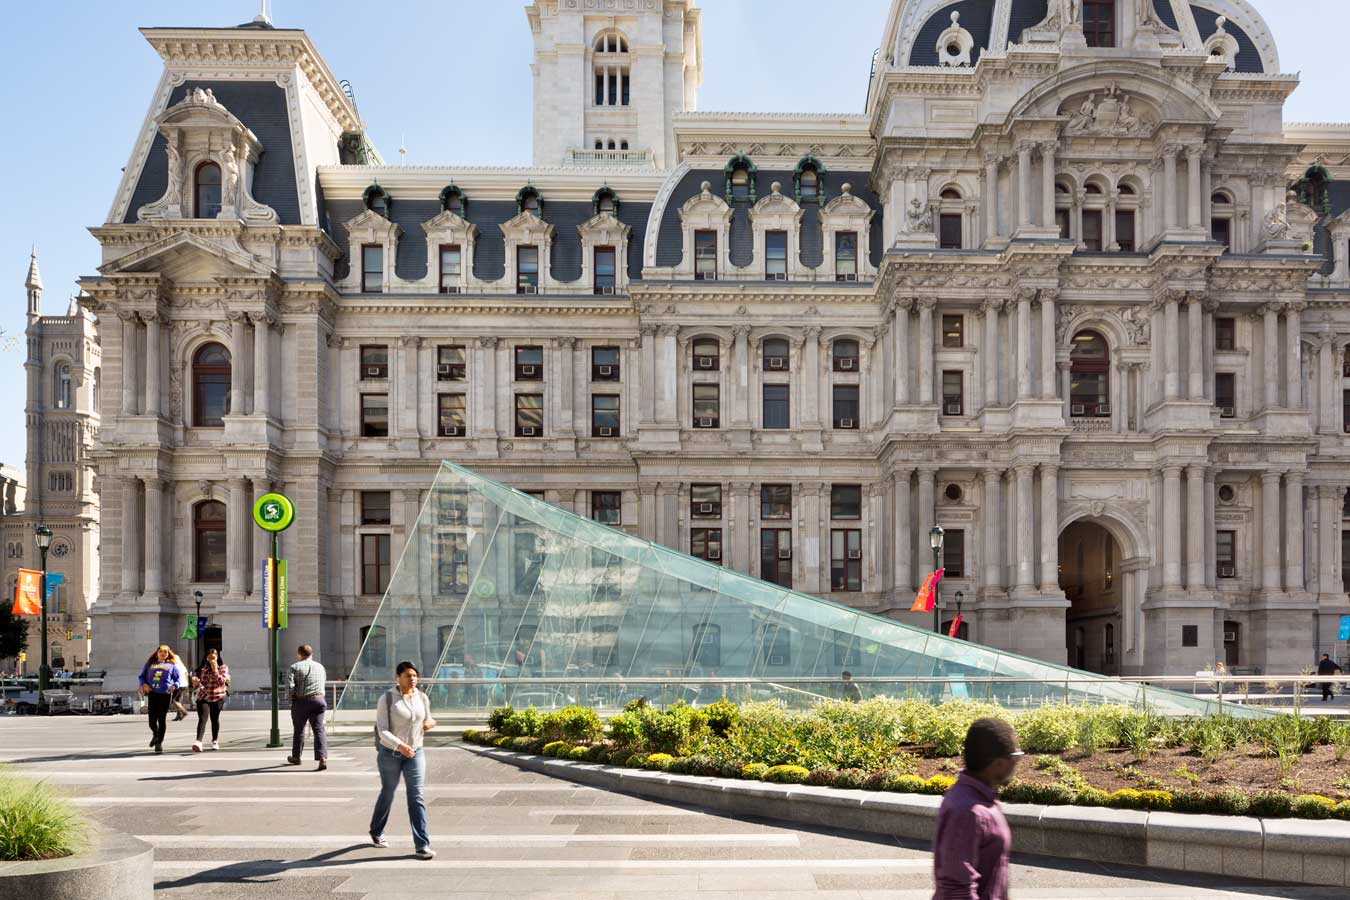 <p>The landscape and architecture work together to enhance and frame the views of City Hall, providing a renewed sense of place and arrival. <br><small>&copy; James Ewing Photography</small></p>